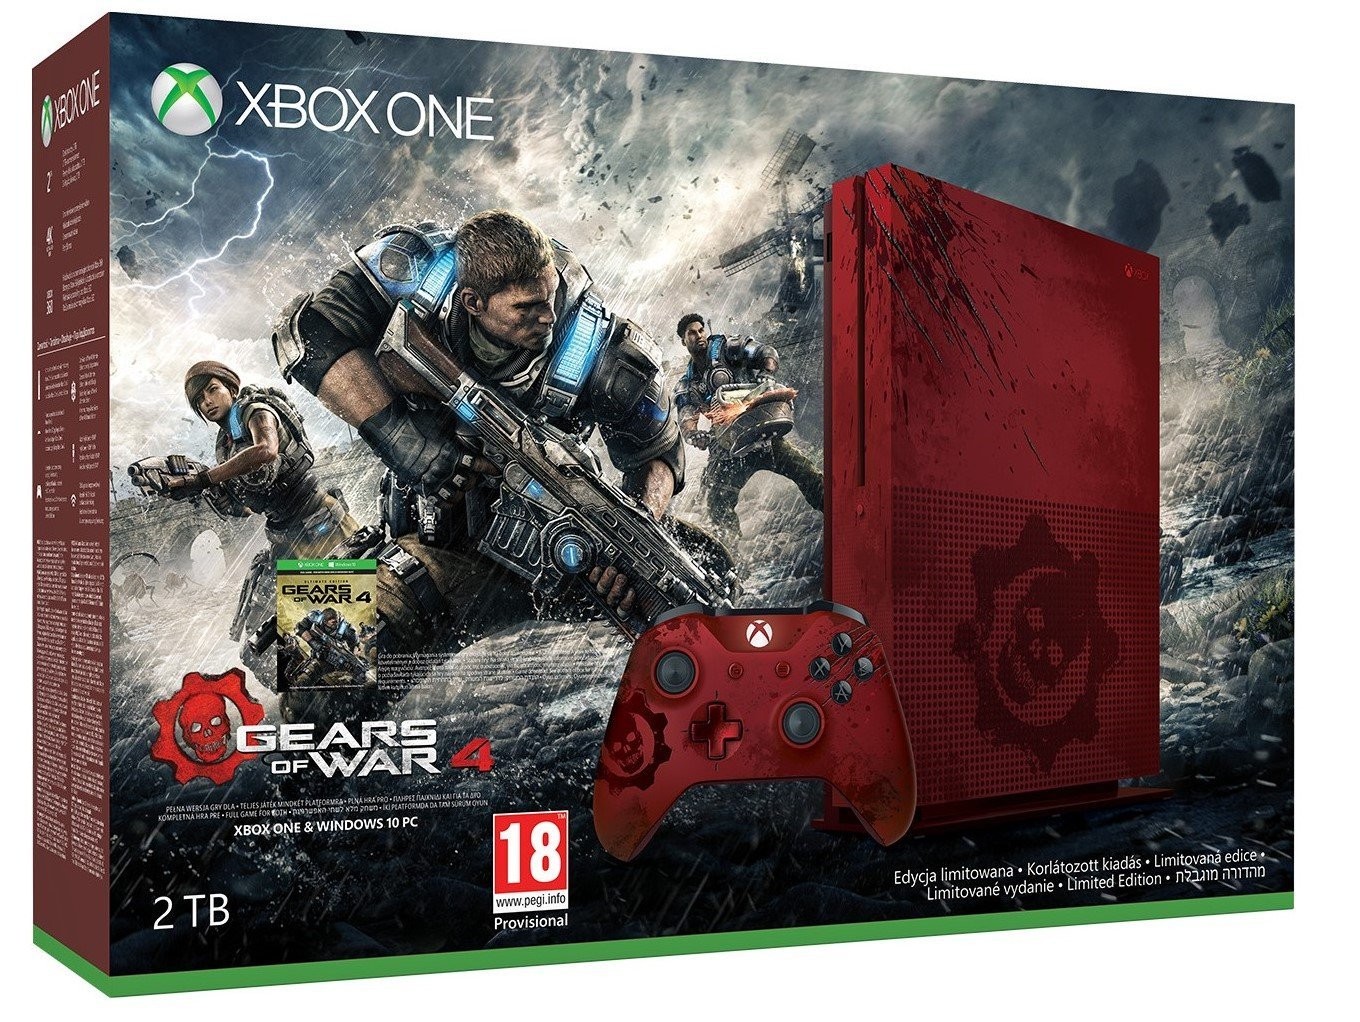 Kob Xbox One S 2tb Console Gears Of War 4 Limited Edition Bundle